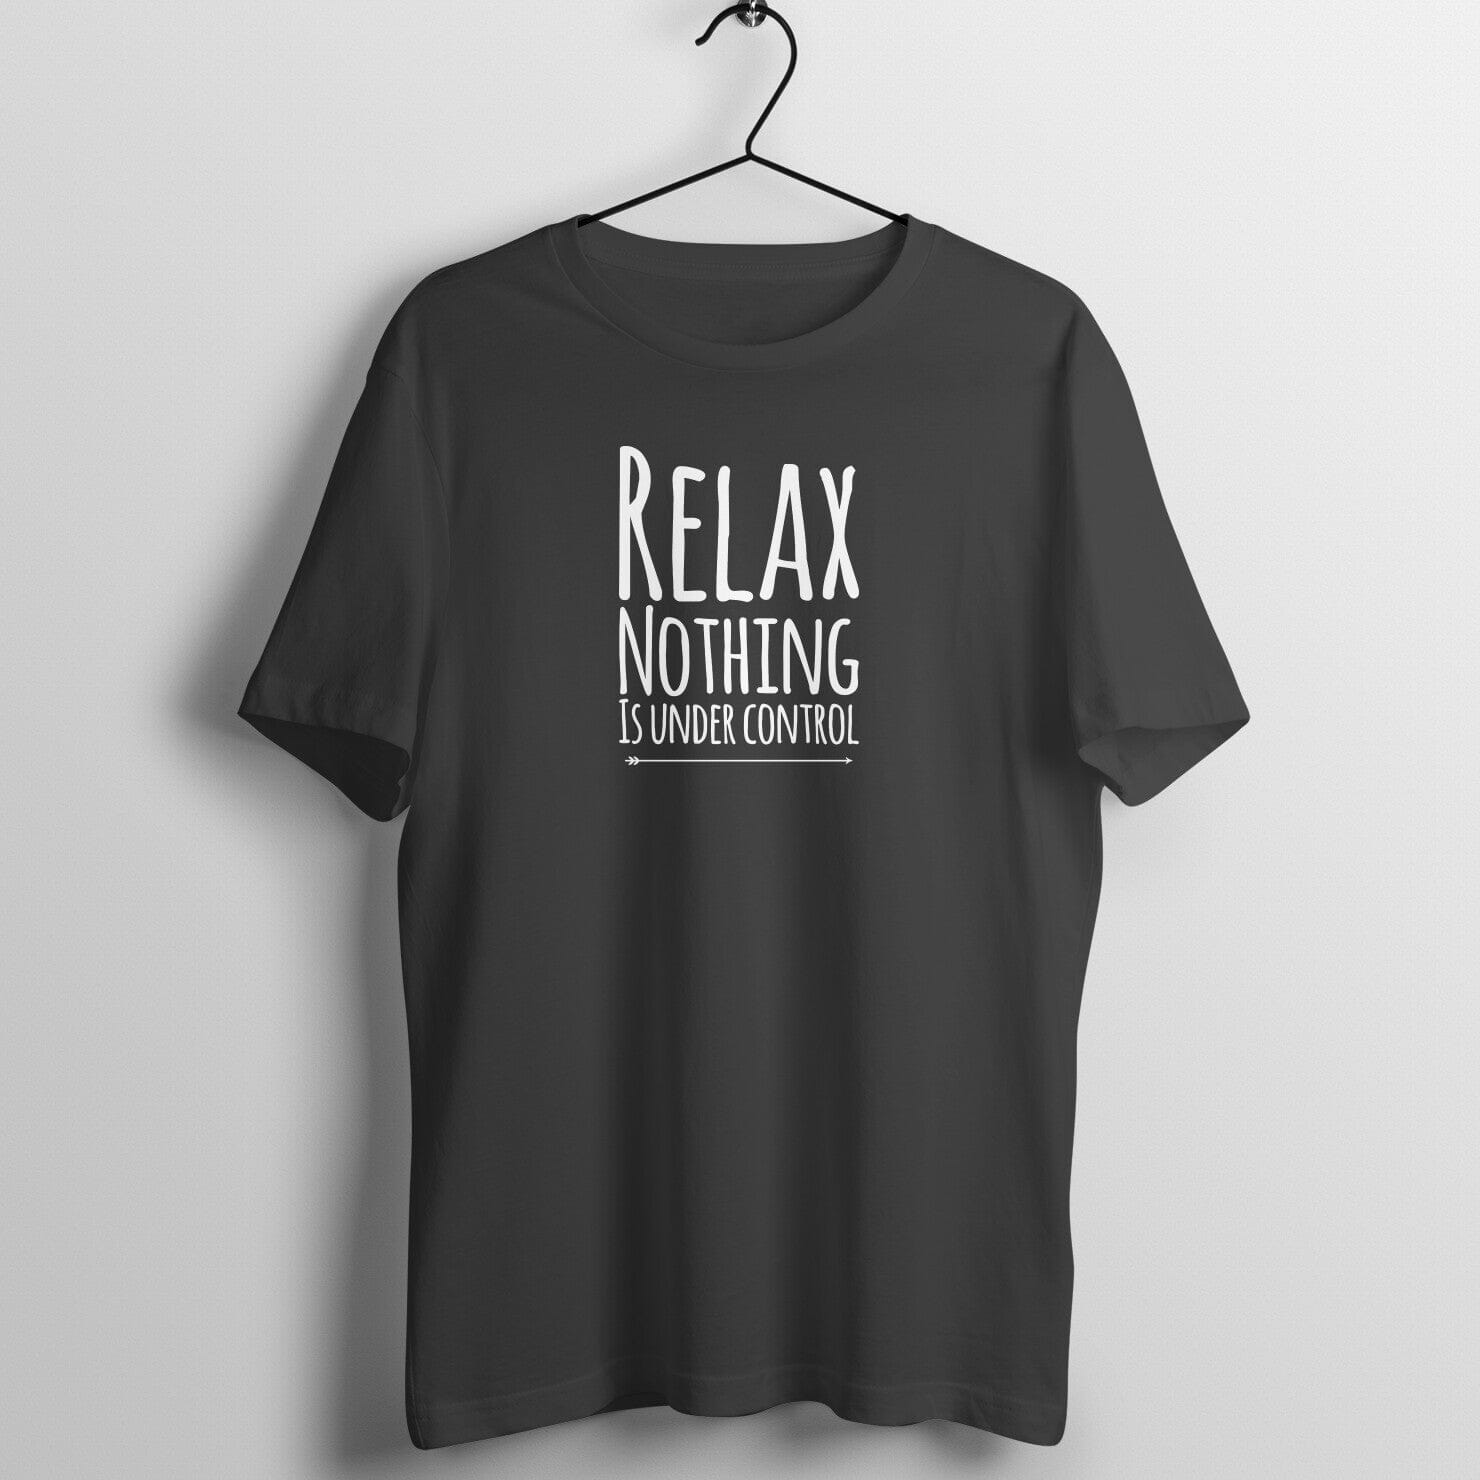 Relax Nothing is Under Control Funny Black T Shirt for Men and Women Printrove Black S 